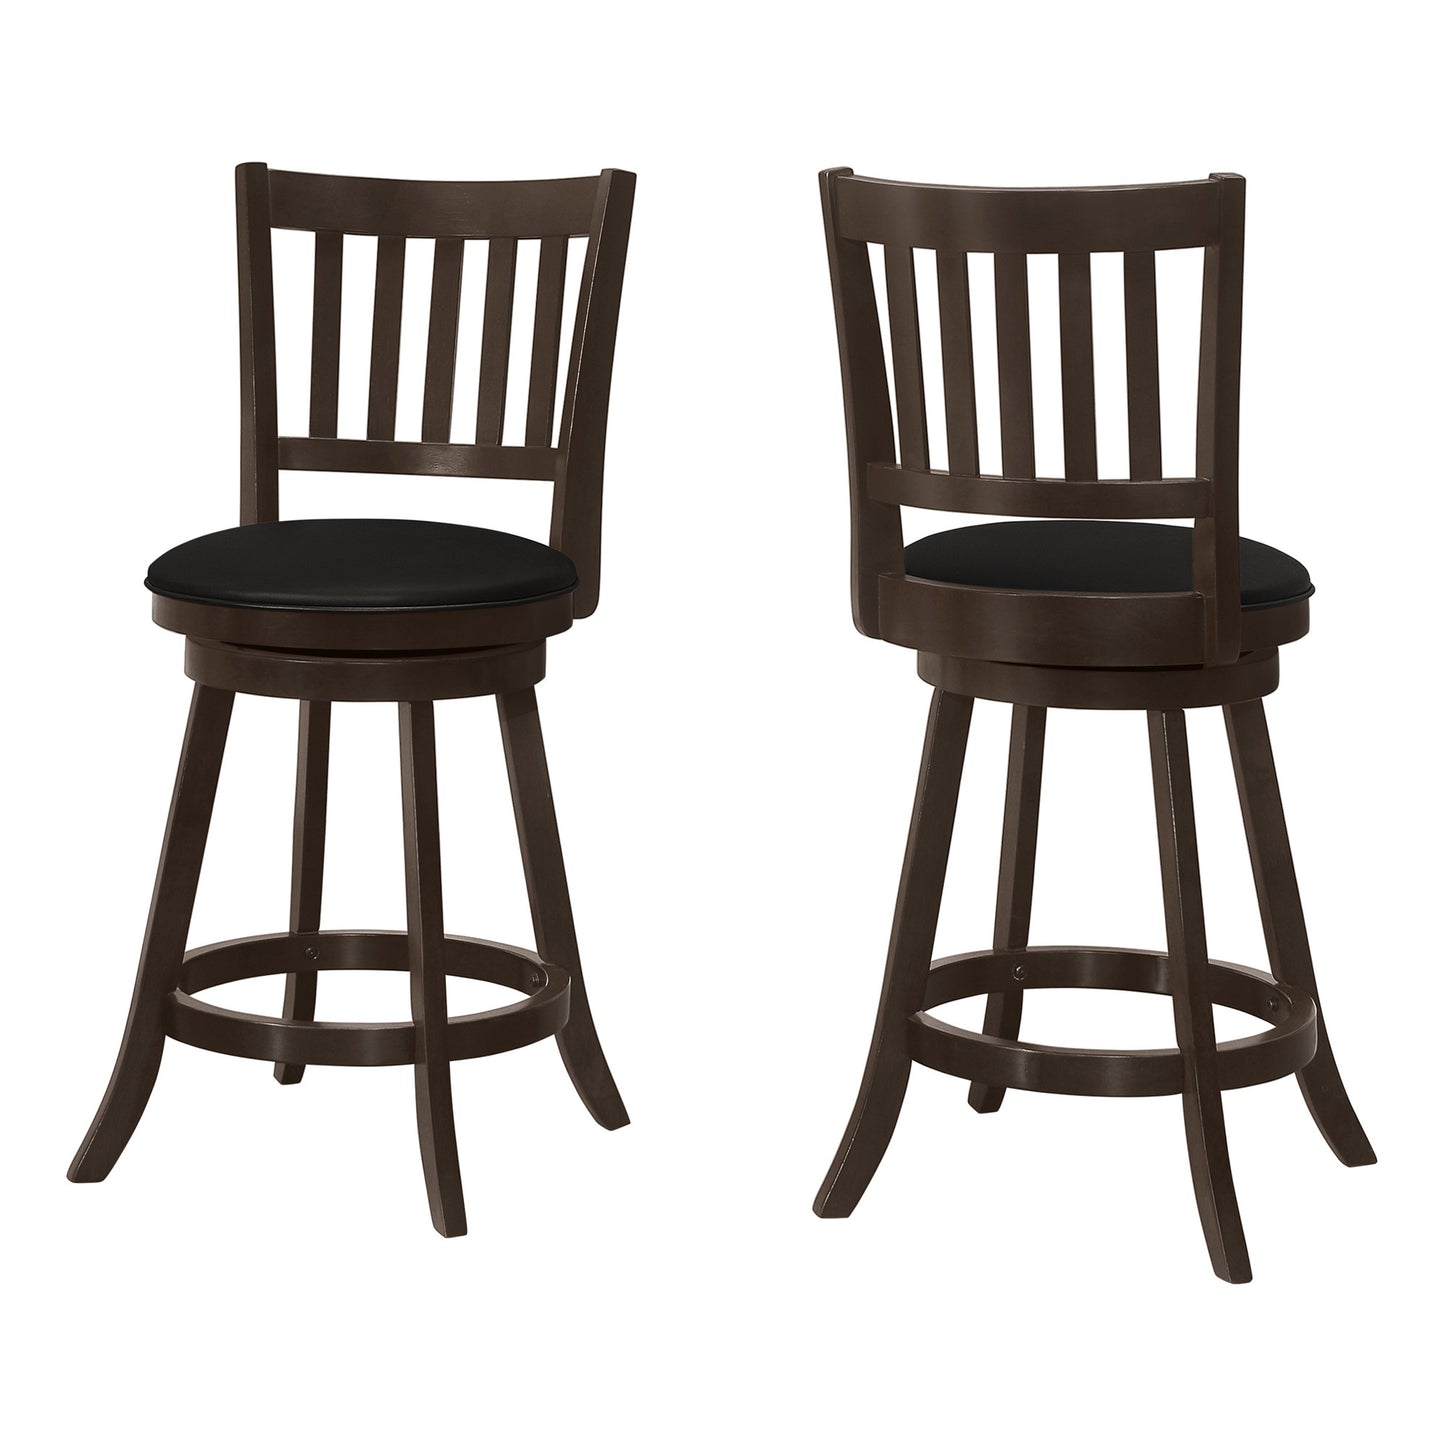 Set Of Two 23" Black And Espresso Faux Leather And Solid Wood Swivel Counter Height Bar Chairs With Footrest